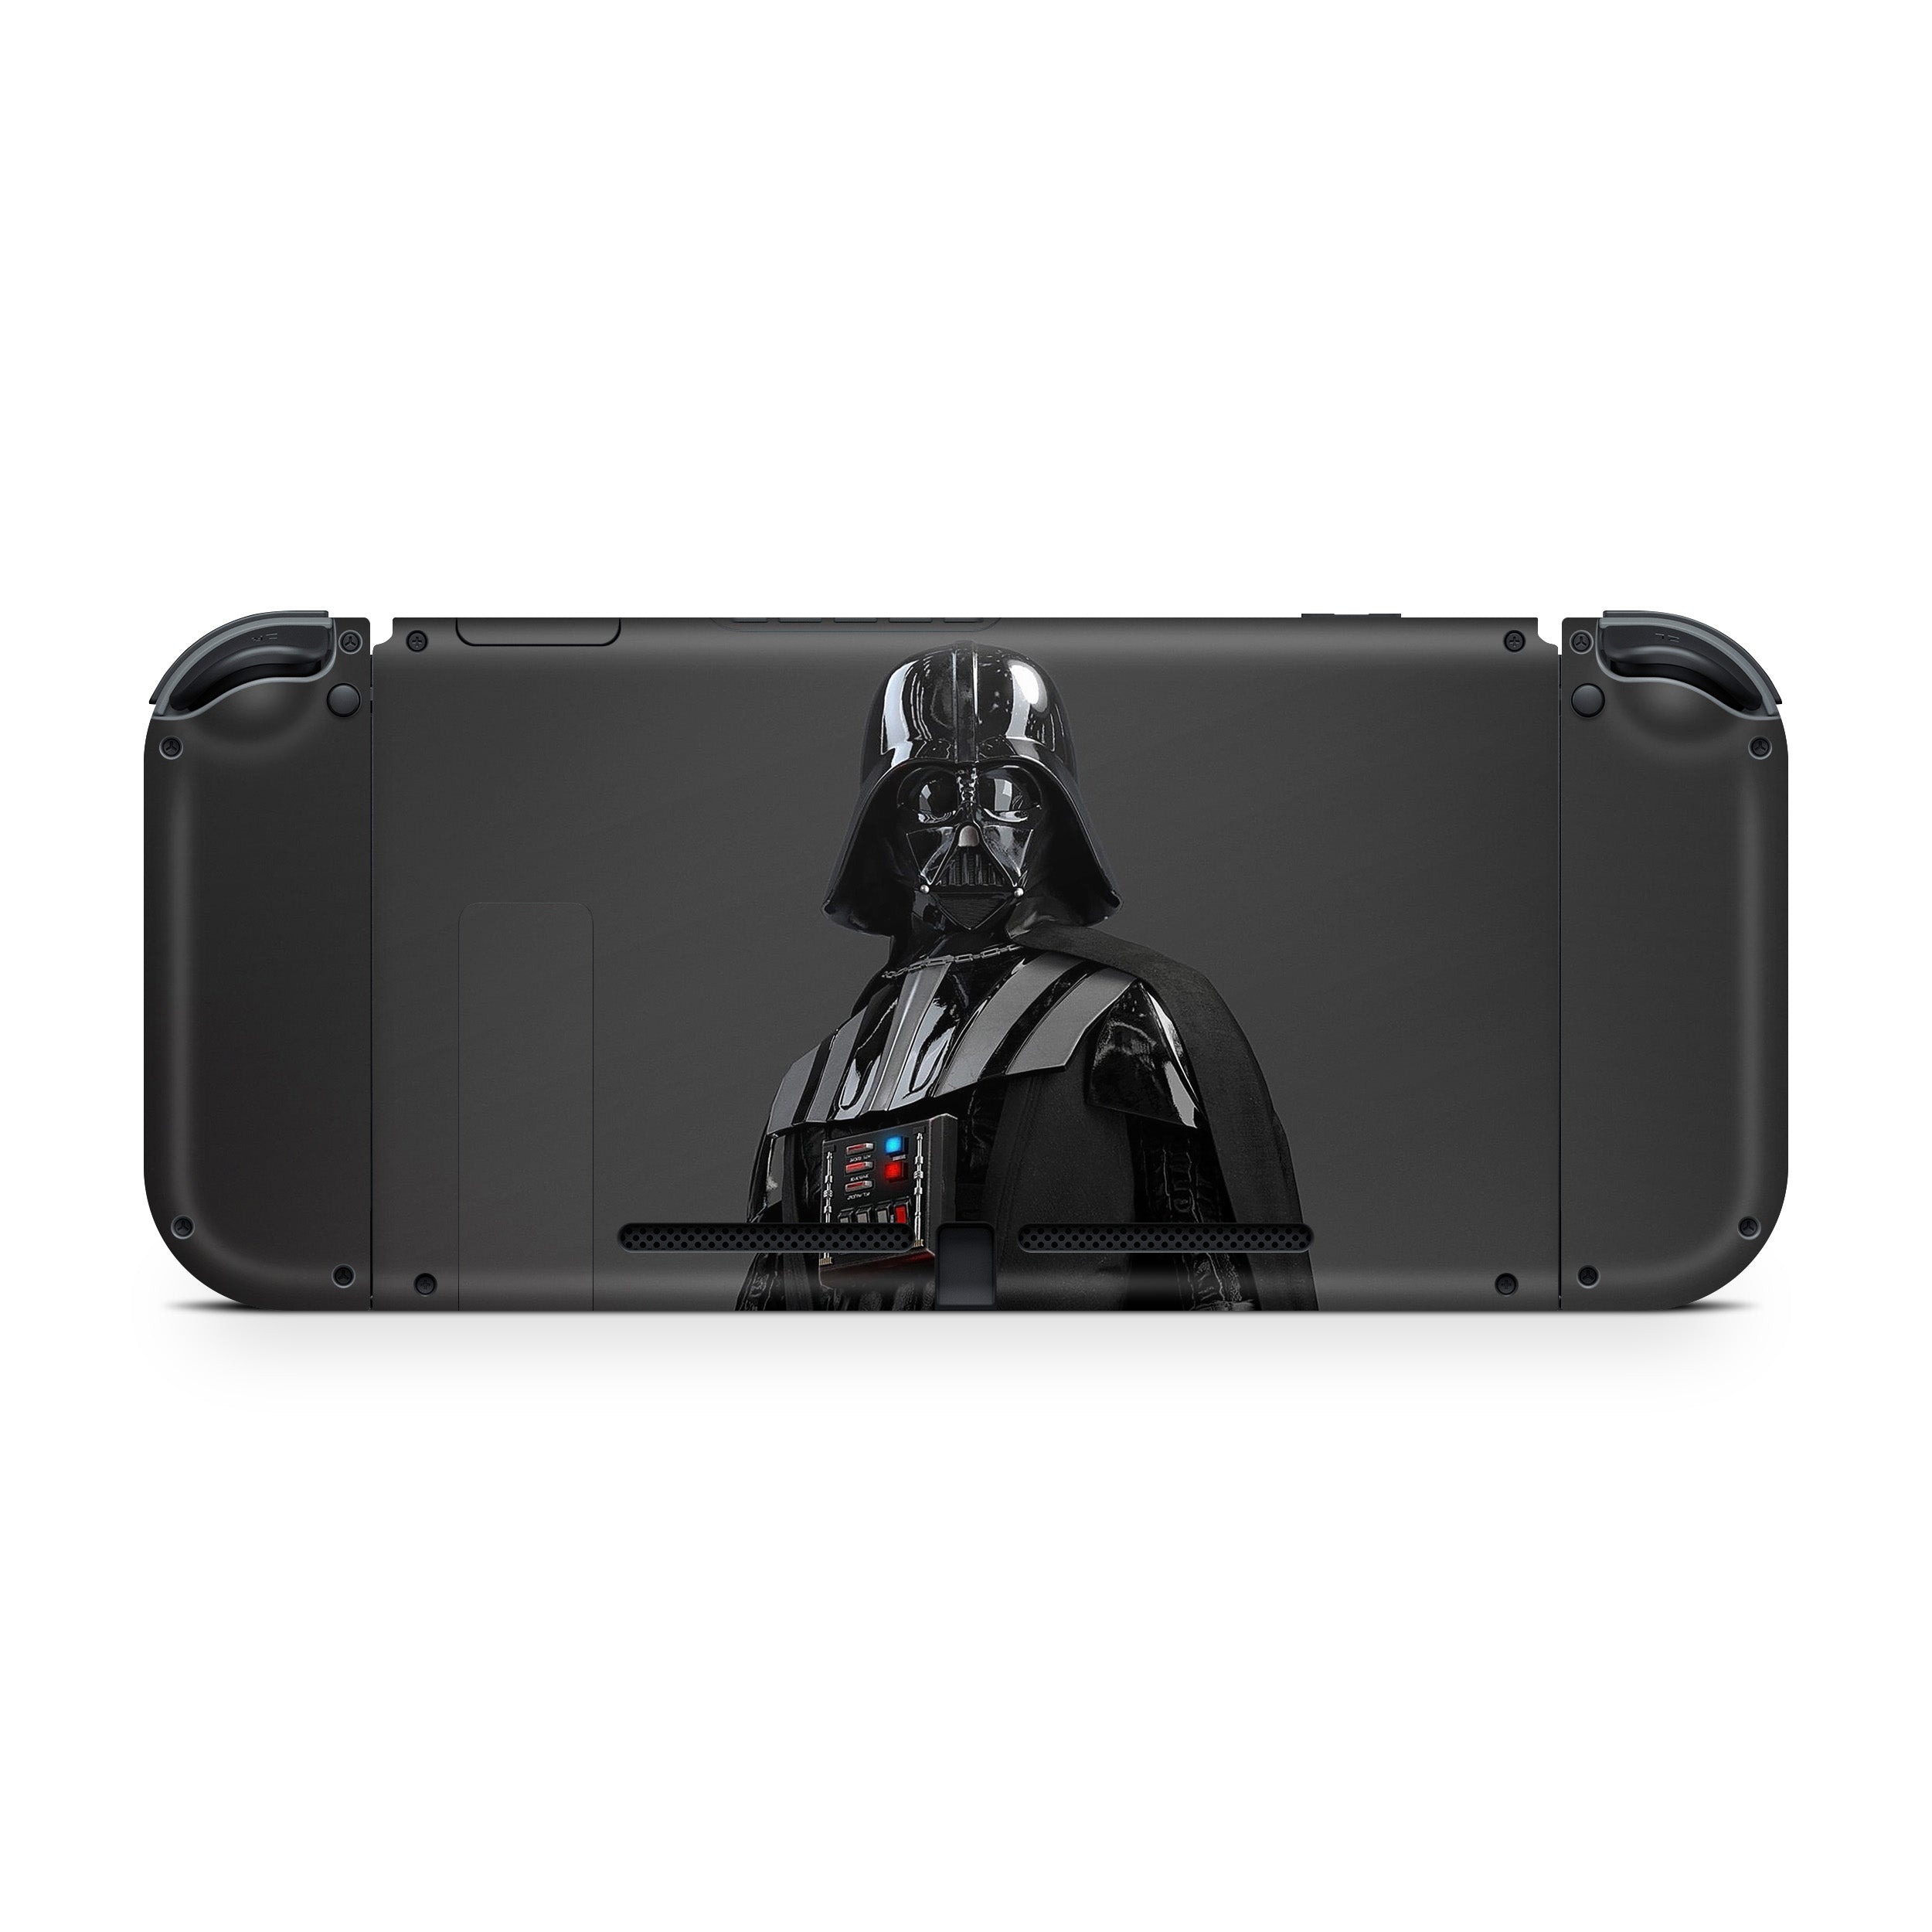 A video game skin featuring a Star Wars Darth Vader design for the Nintendo Switch.